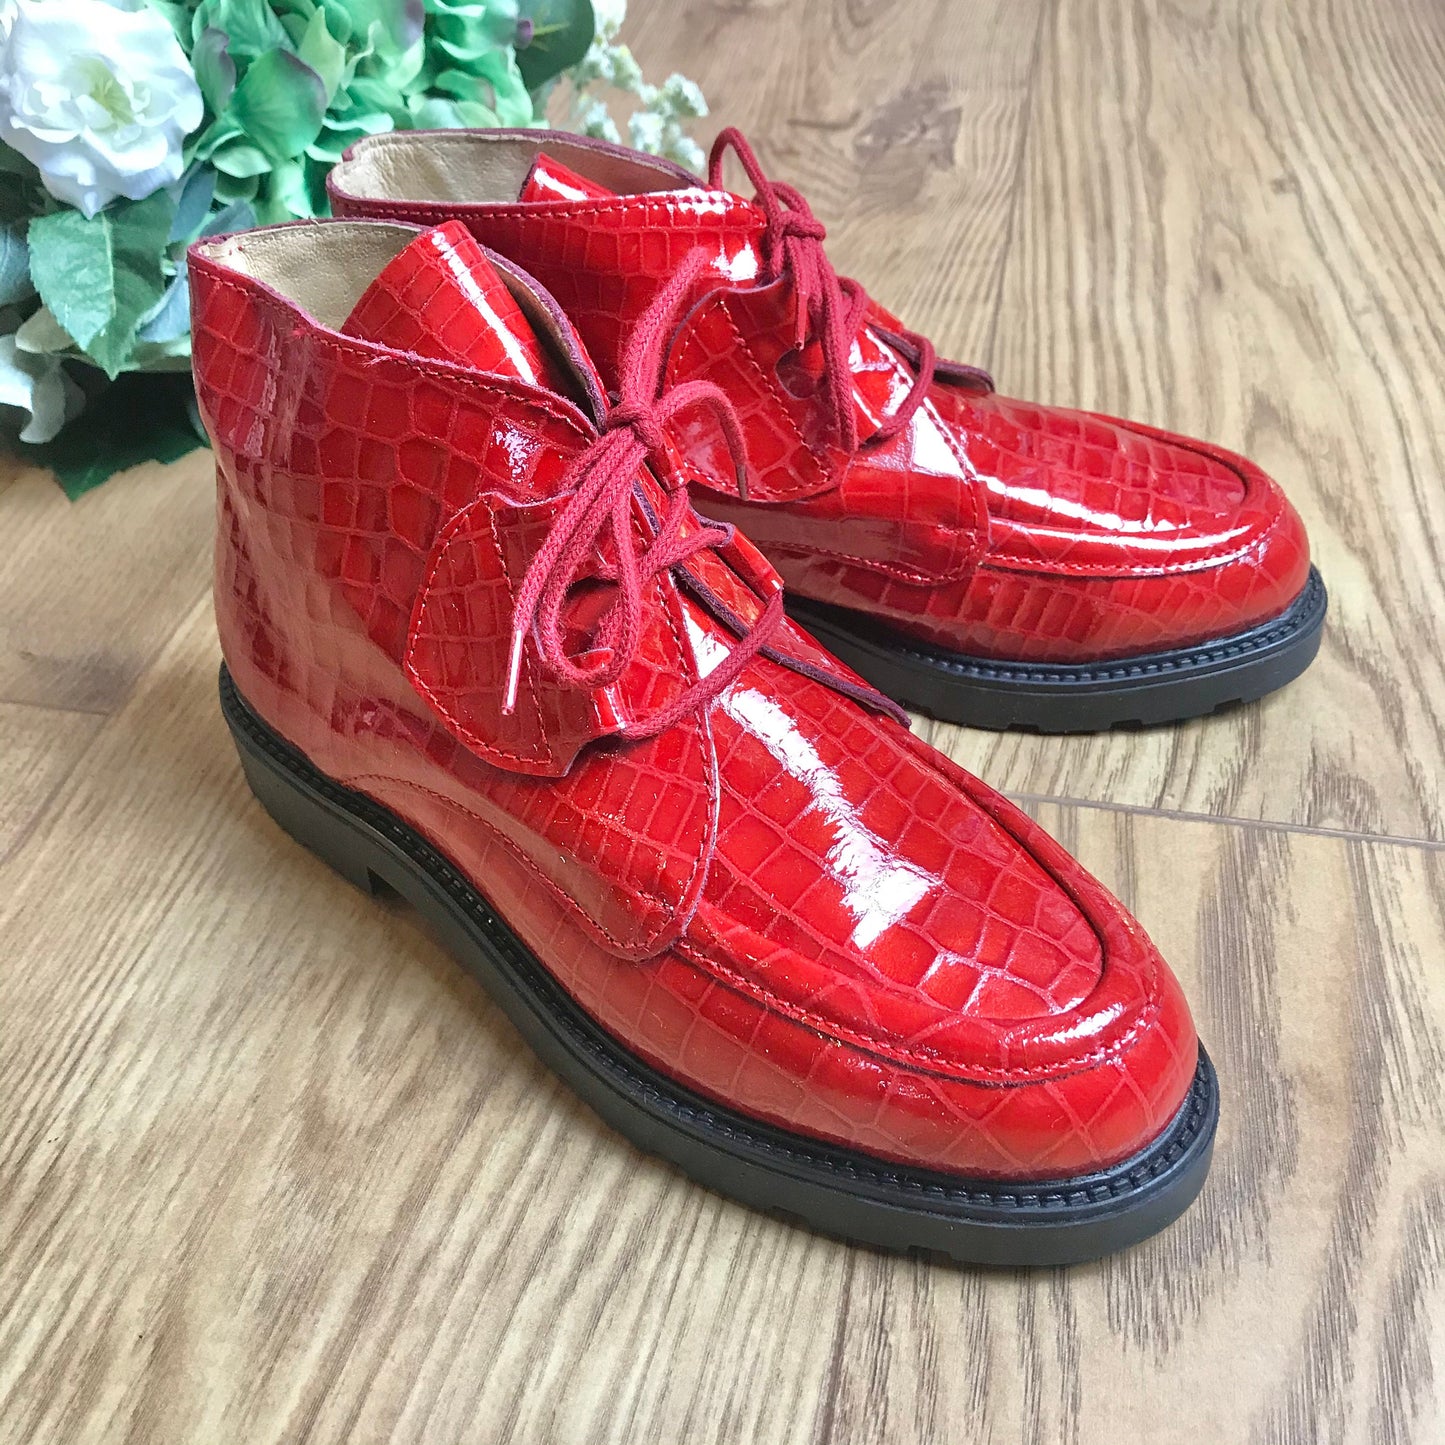 Deadstock 1970's Children's Red Patent Leather Low Boots  Made in France EU34